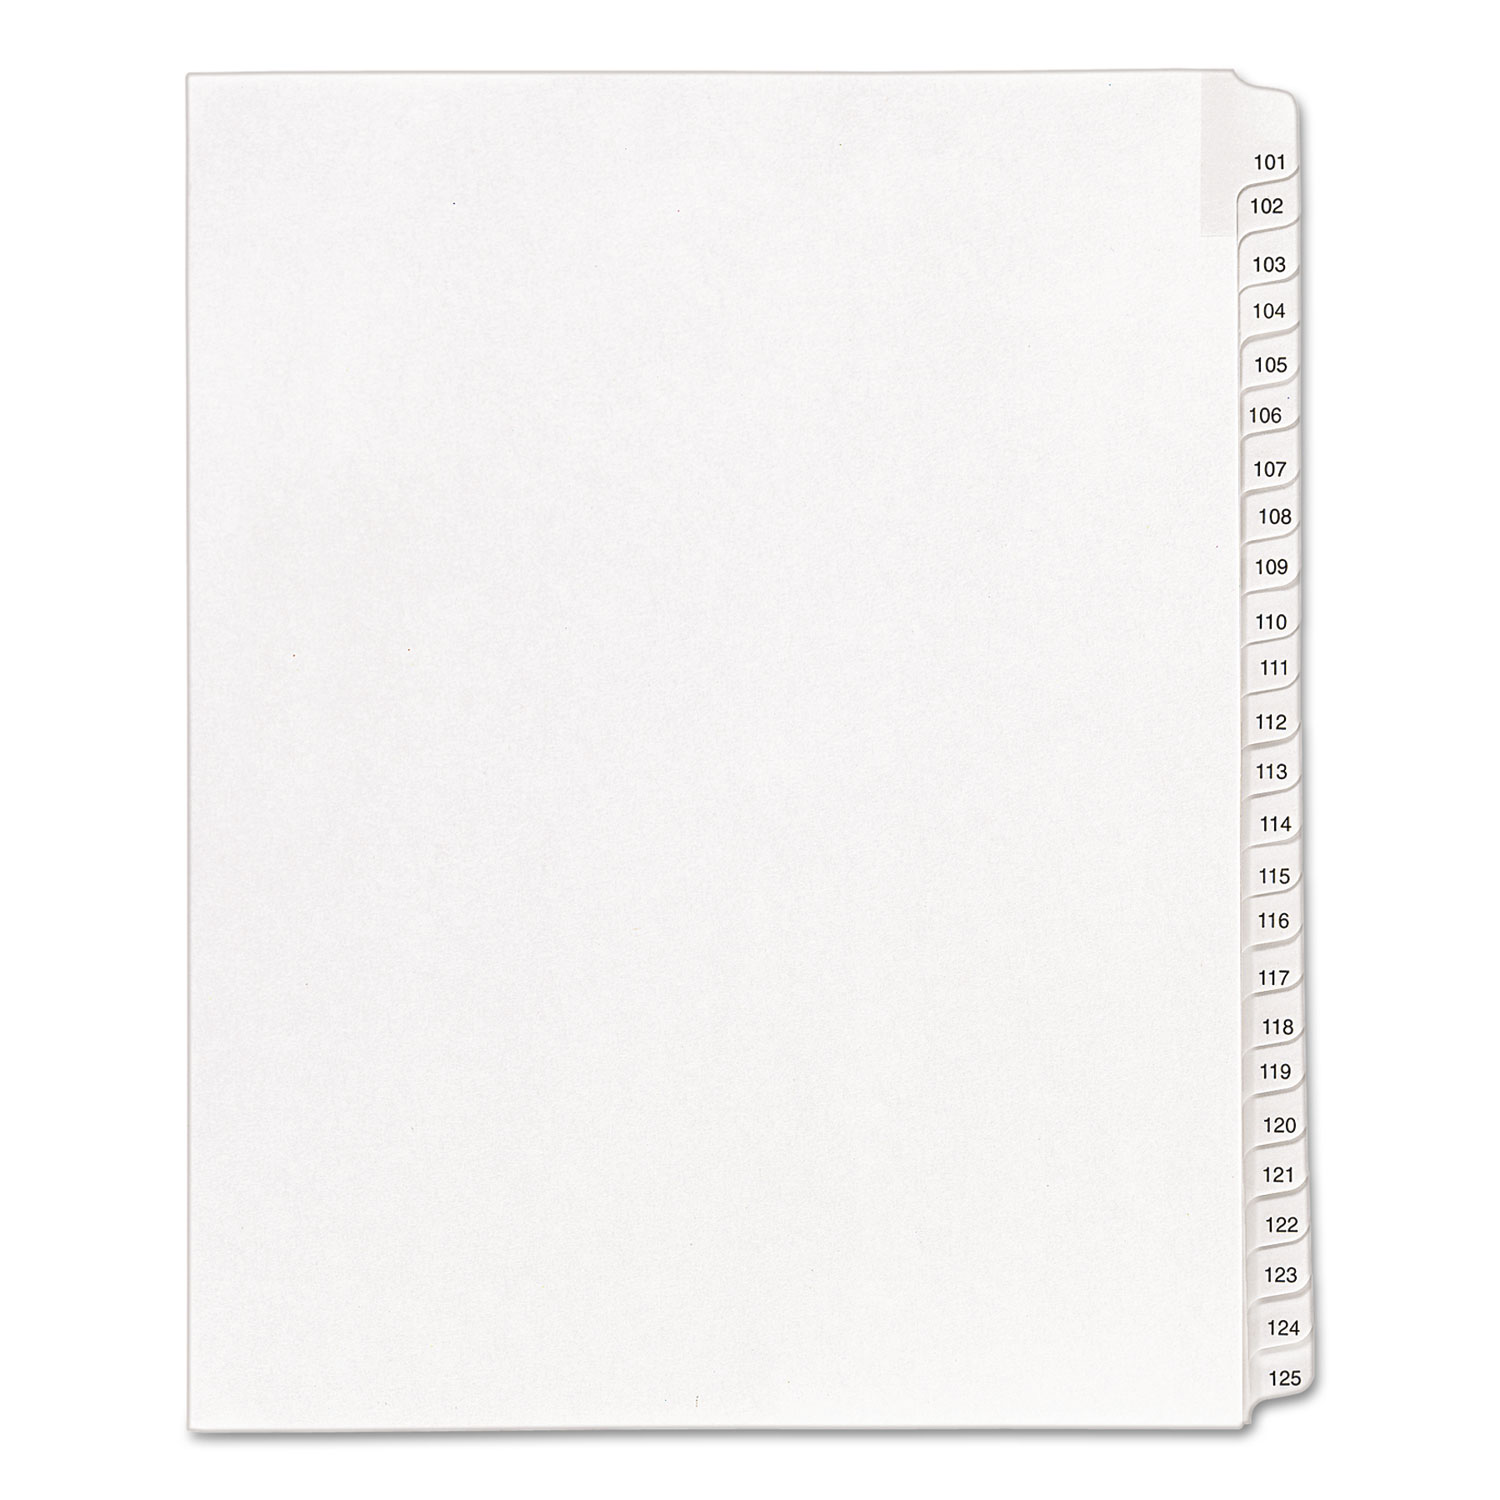  Avery 01705 Preprinted Legal Exhibit Side Tab Index Dividers, Allstate Style, 25-Tab, 101 to 125, 11 x 8.5, White, 1 Set (AVE01705) 